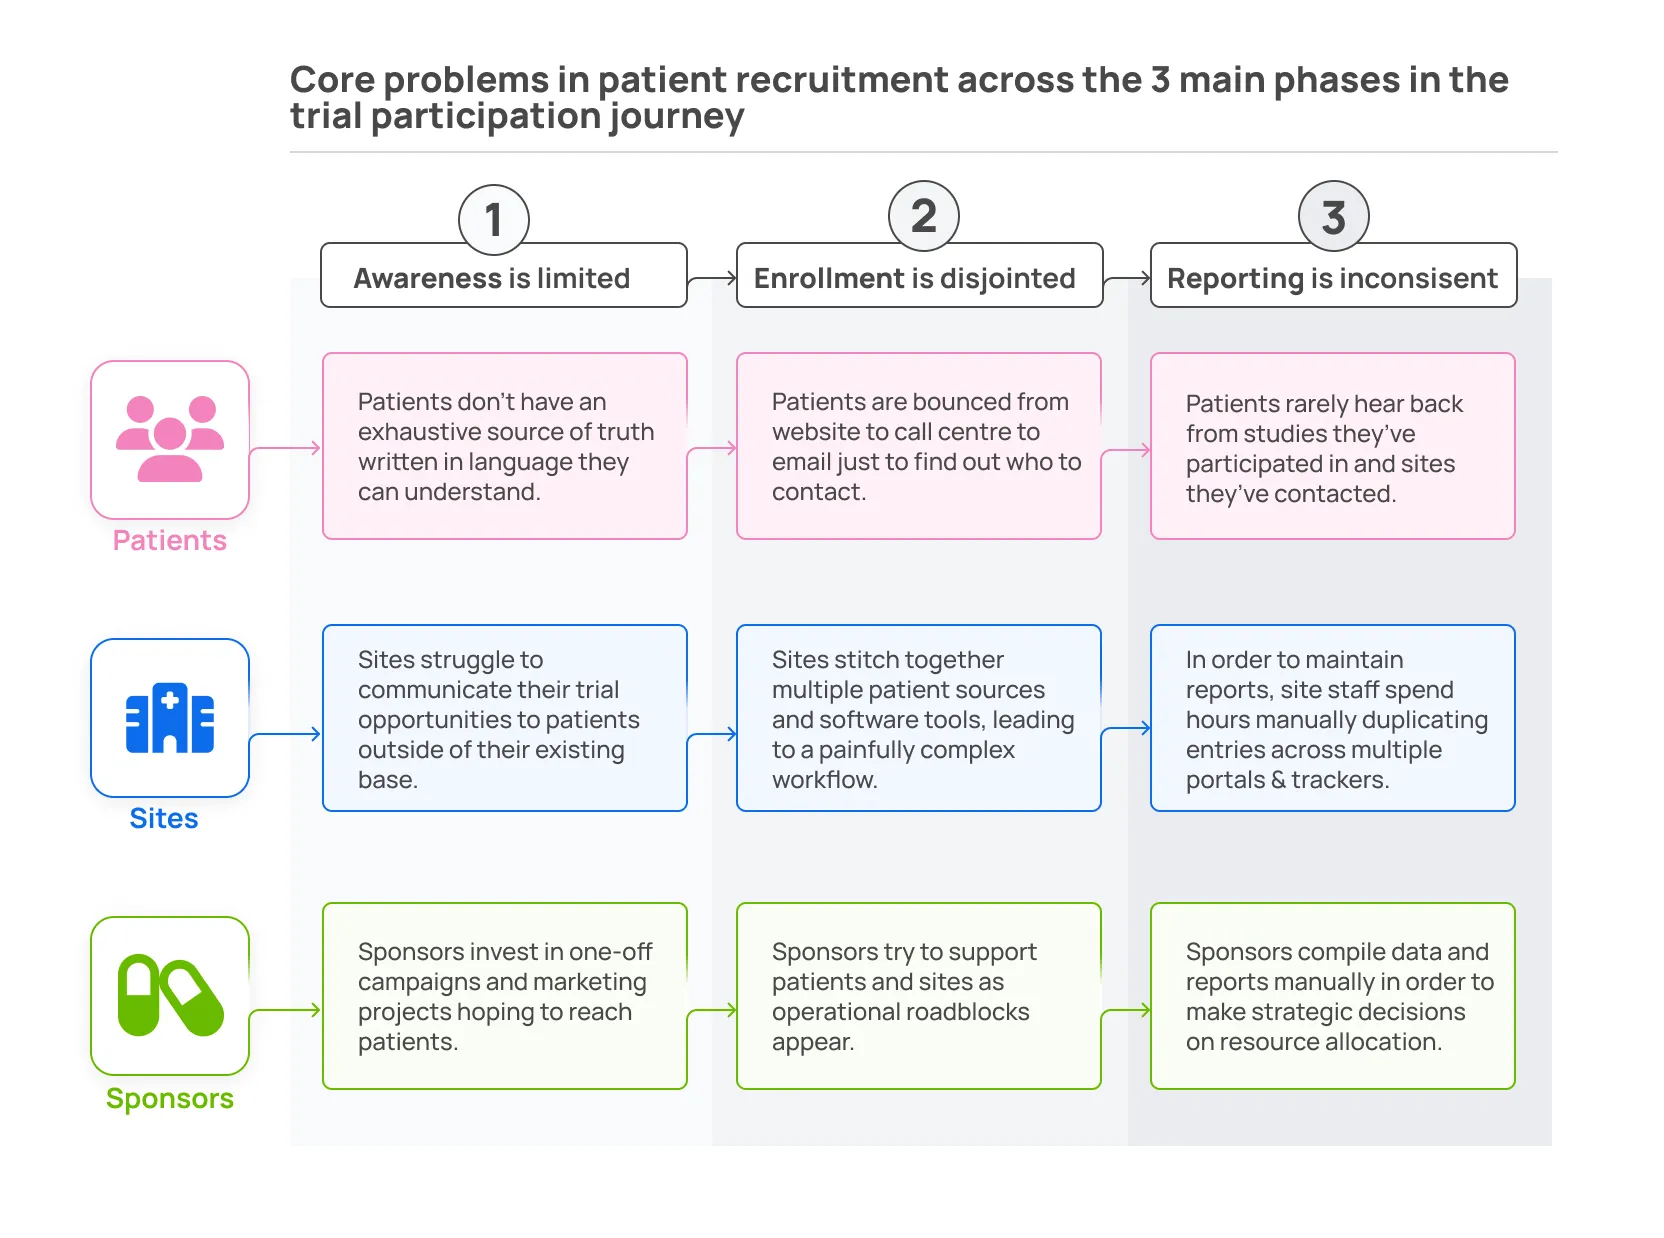 Table describing the main problems in the trial participation journey across the 3 core stakholders